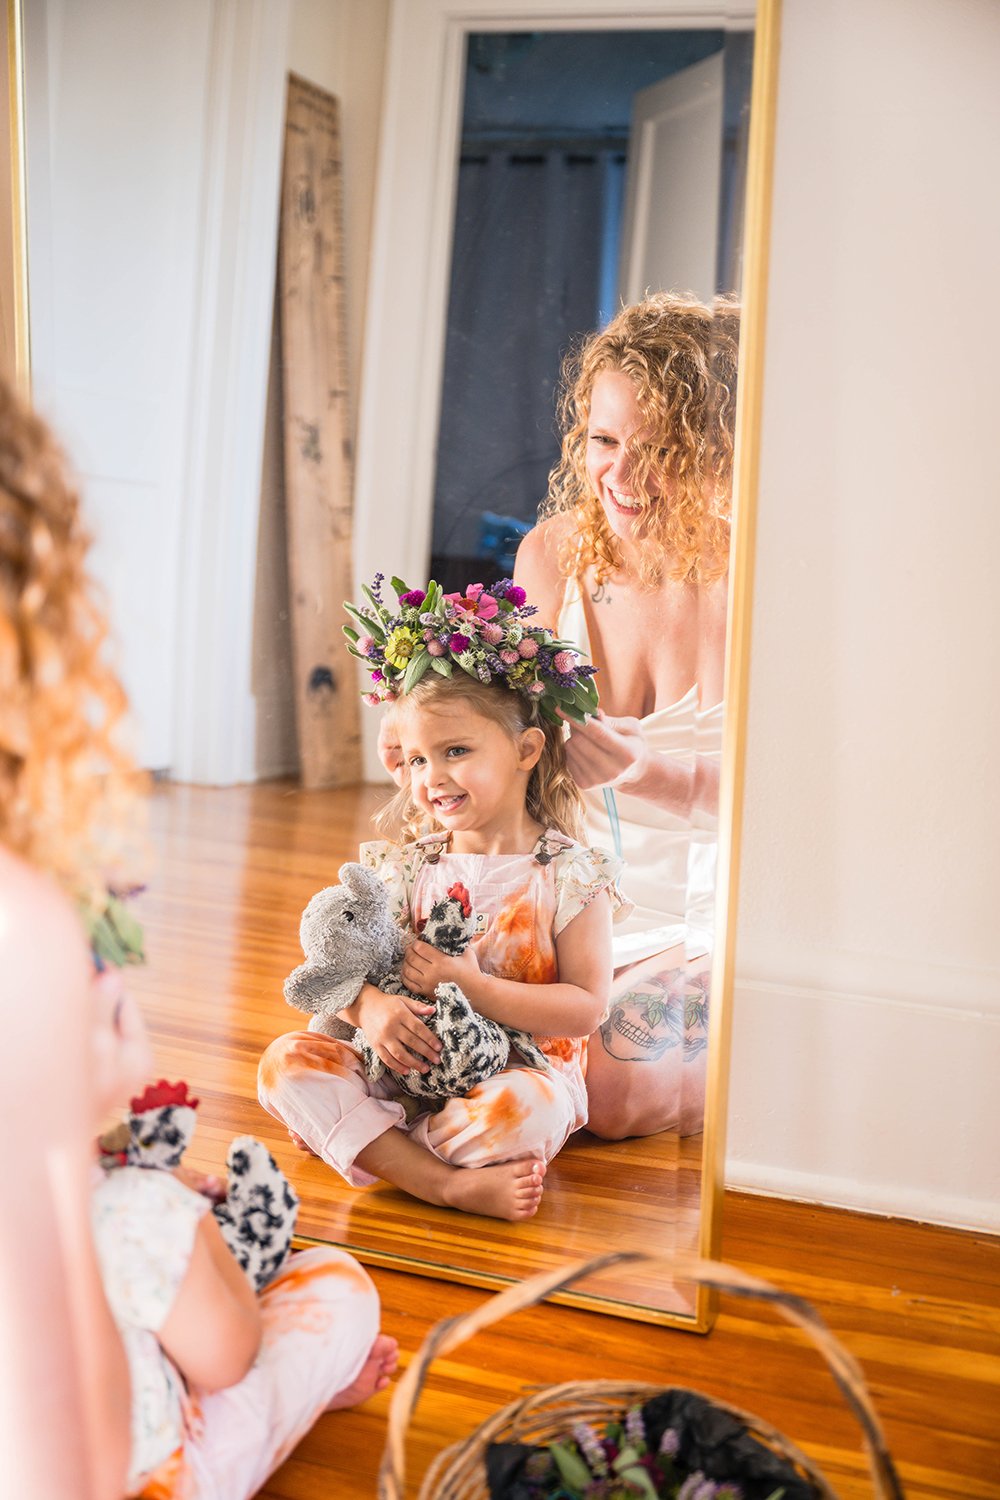 A mother helps put a flower crown on her daughter's head as they both sit in front of a mirror. The daughter smiles and holds two stuffed animals in her lap.